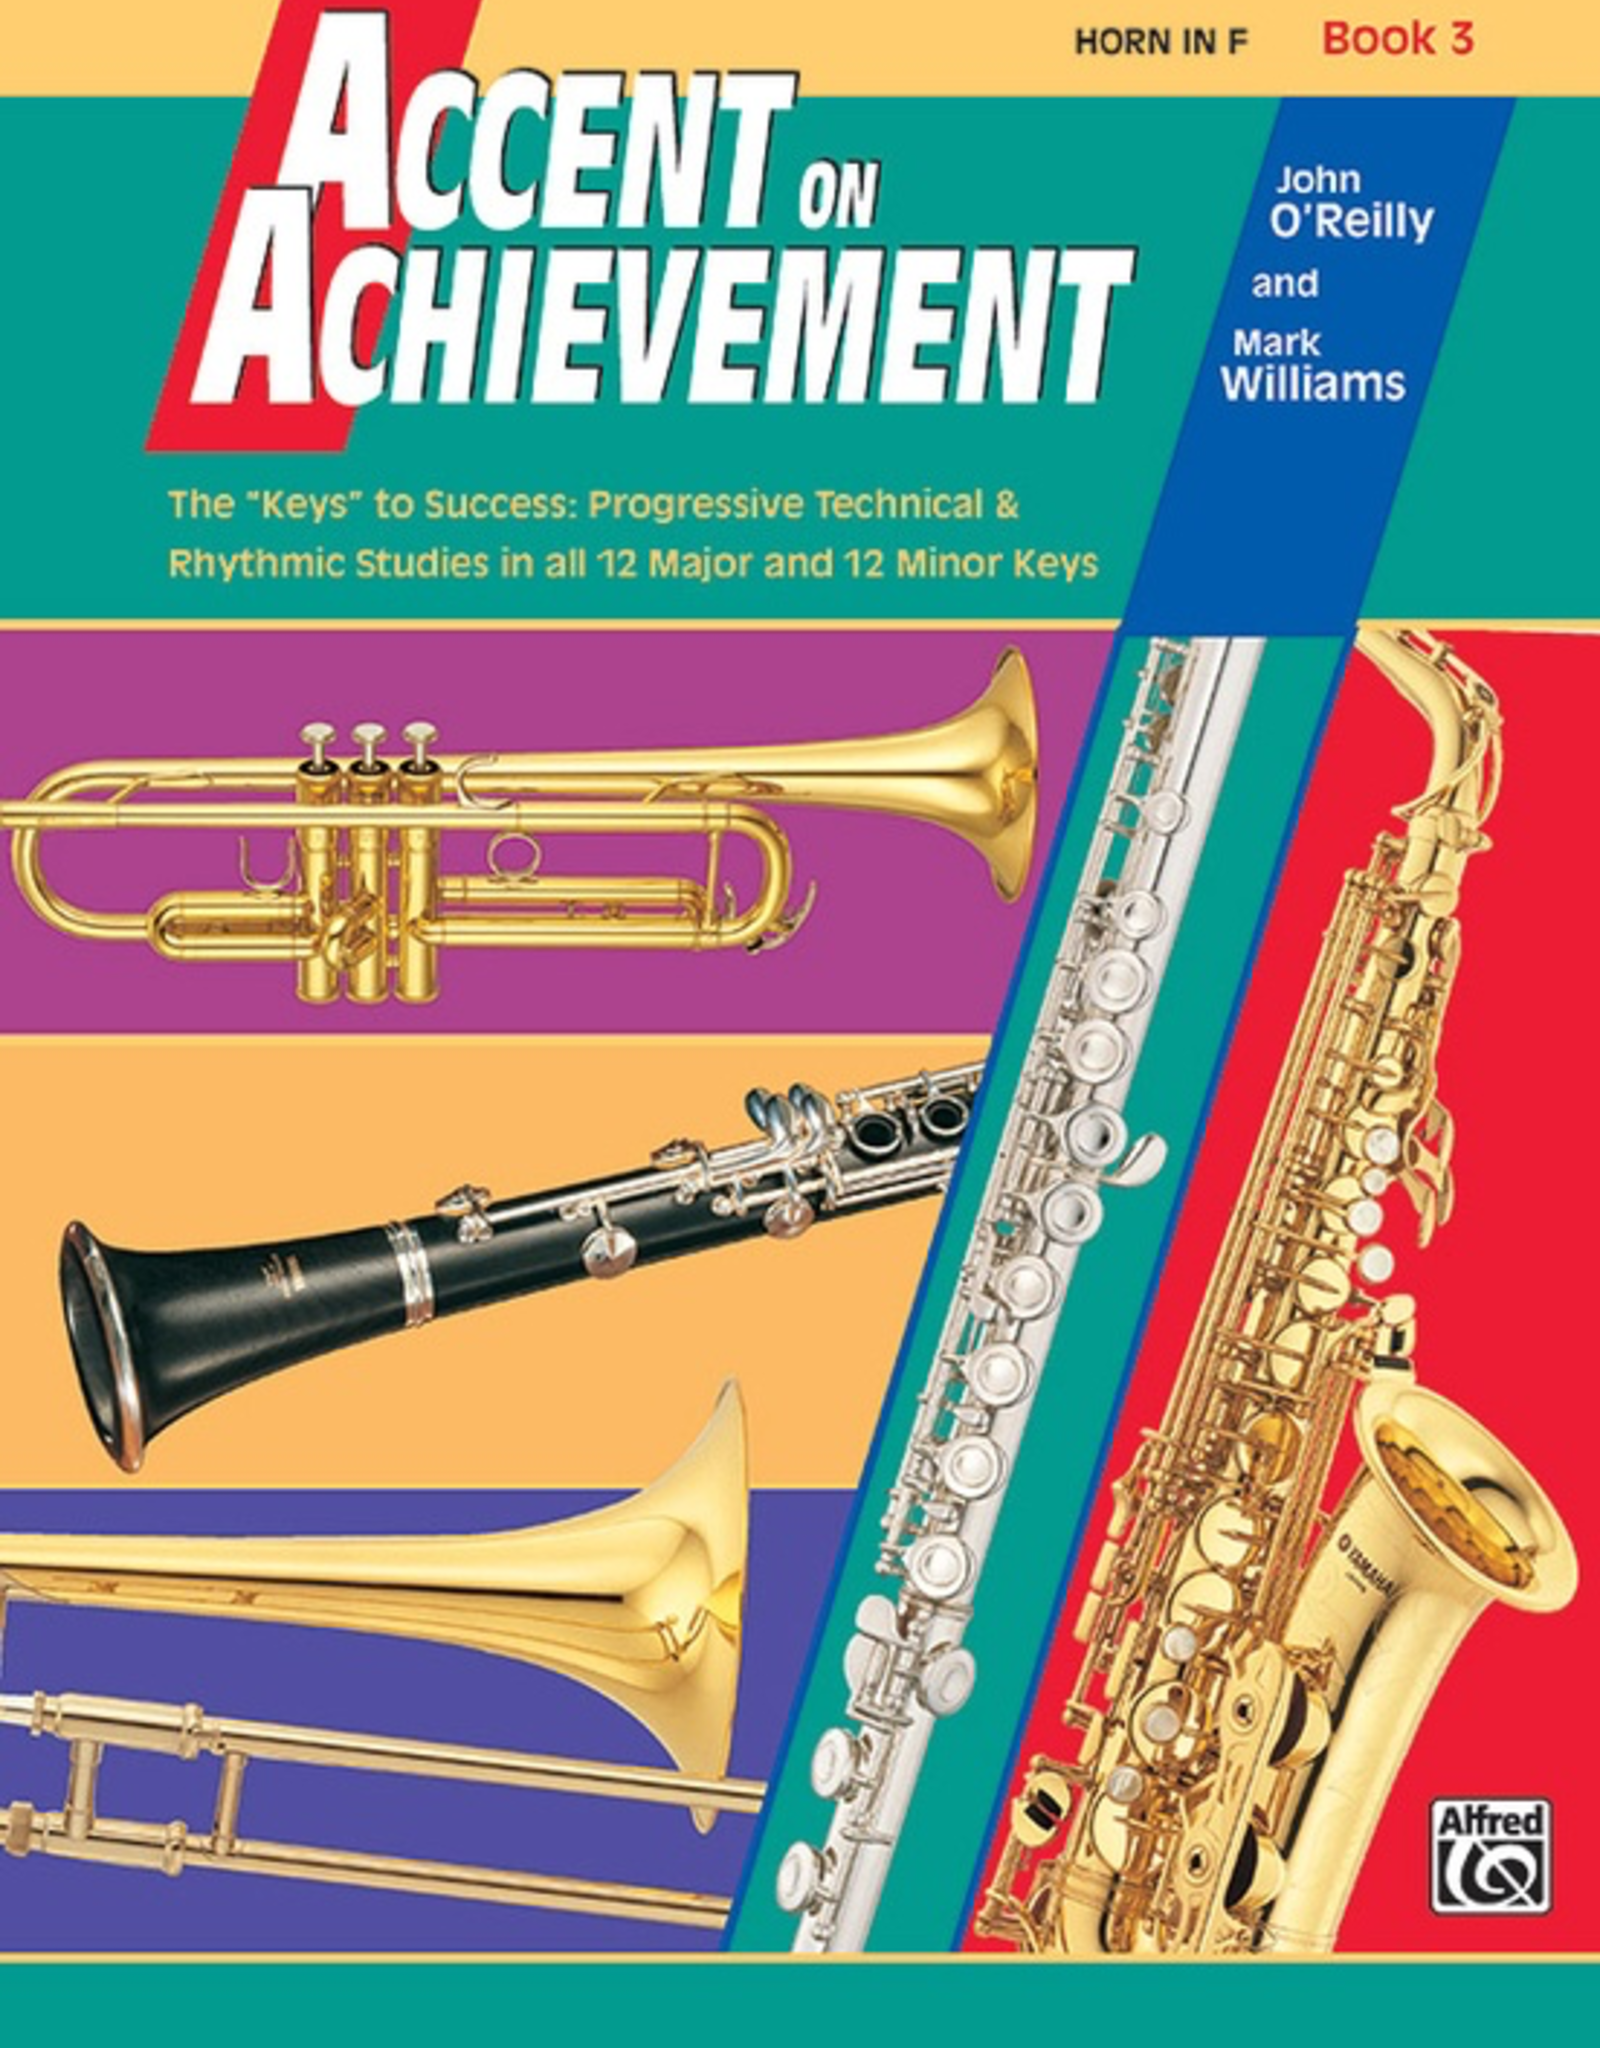 Alfred Accent on Achievement Book 3 - Horn in F (French Horn)